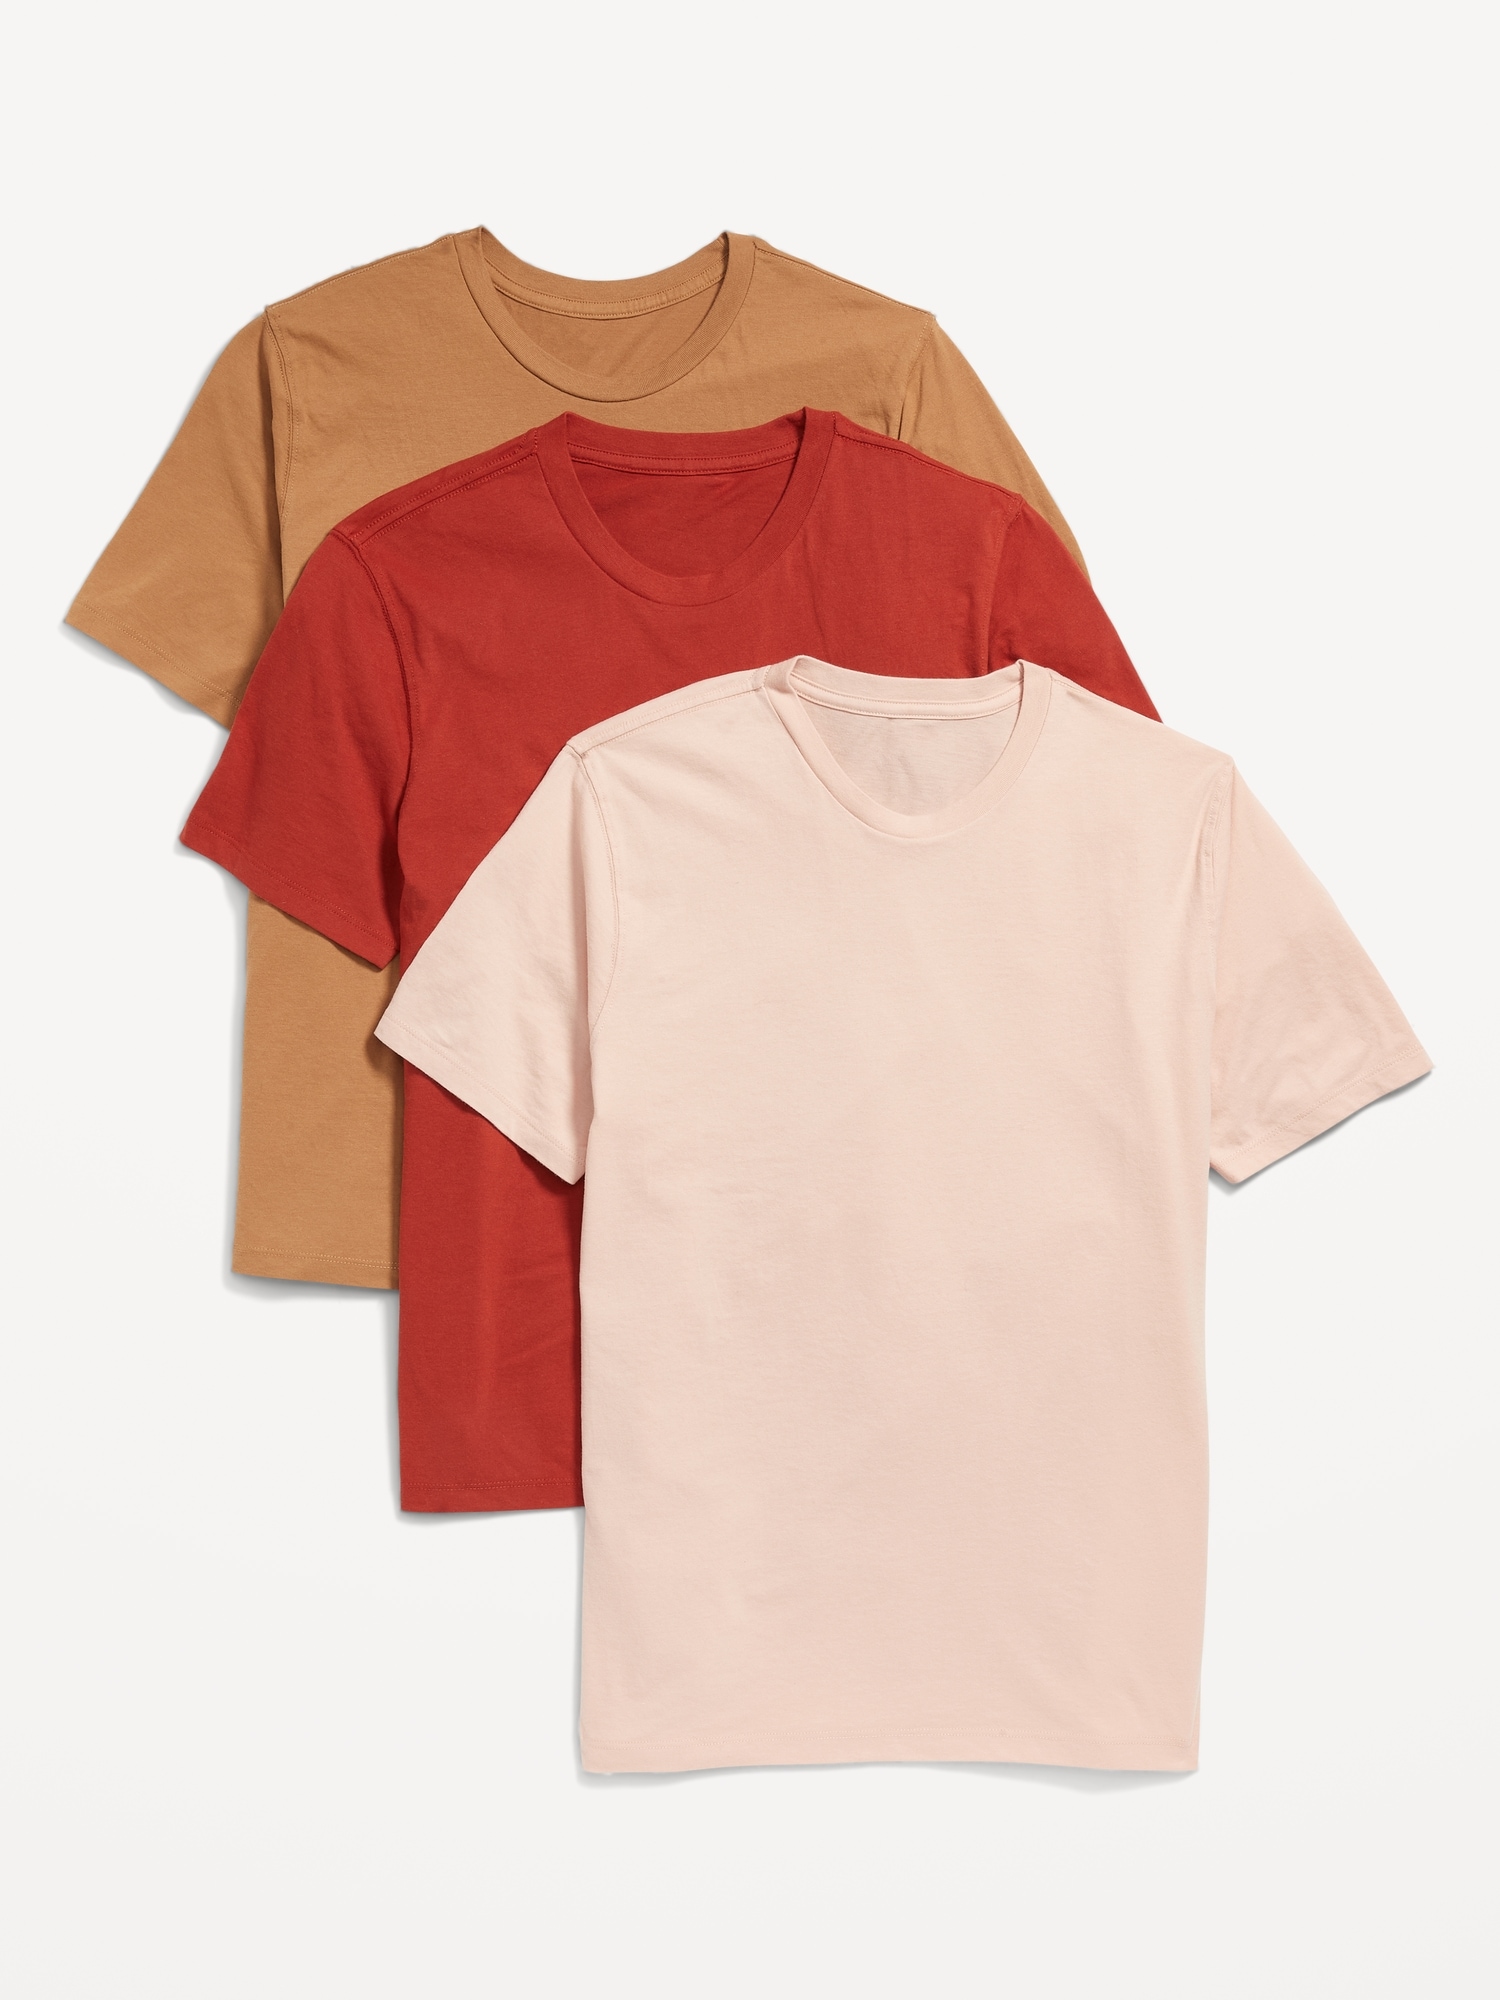 Old Navy Men's Soft-Washed Crew-Neck T-Shirt 3-Pack - - Tall Size XXL